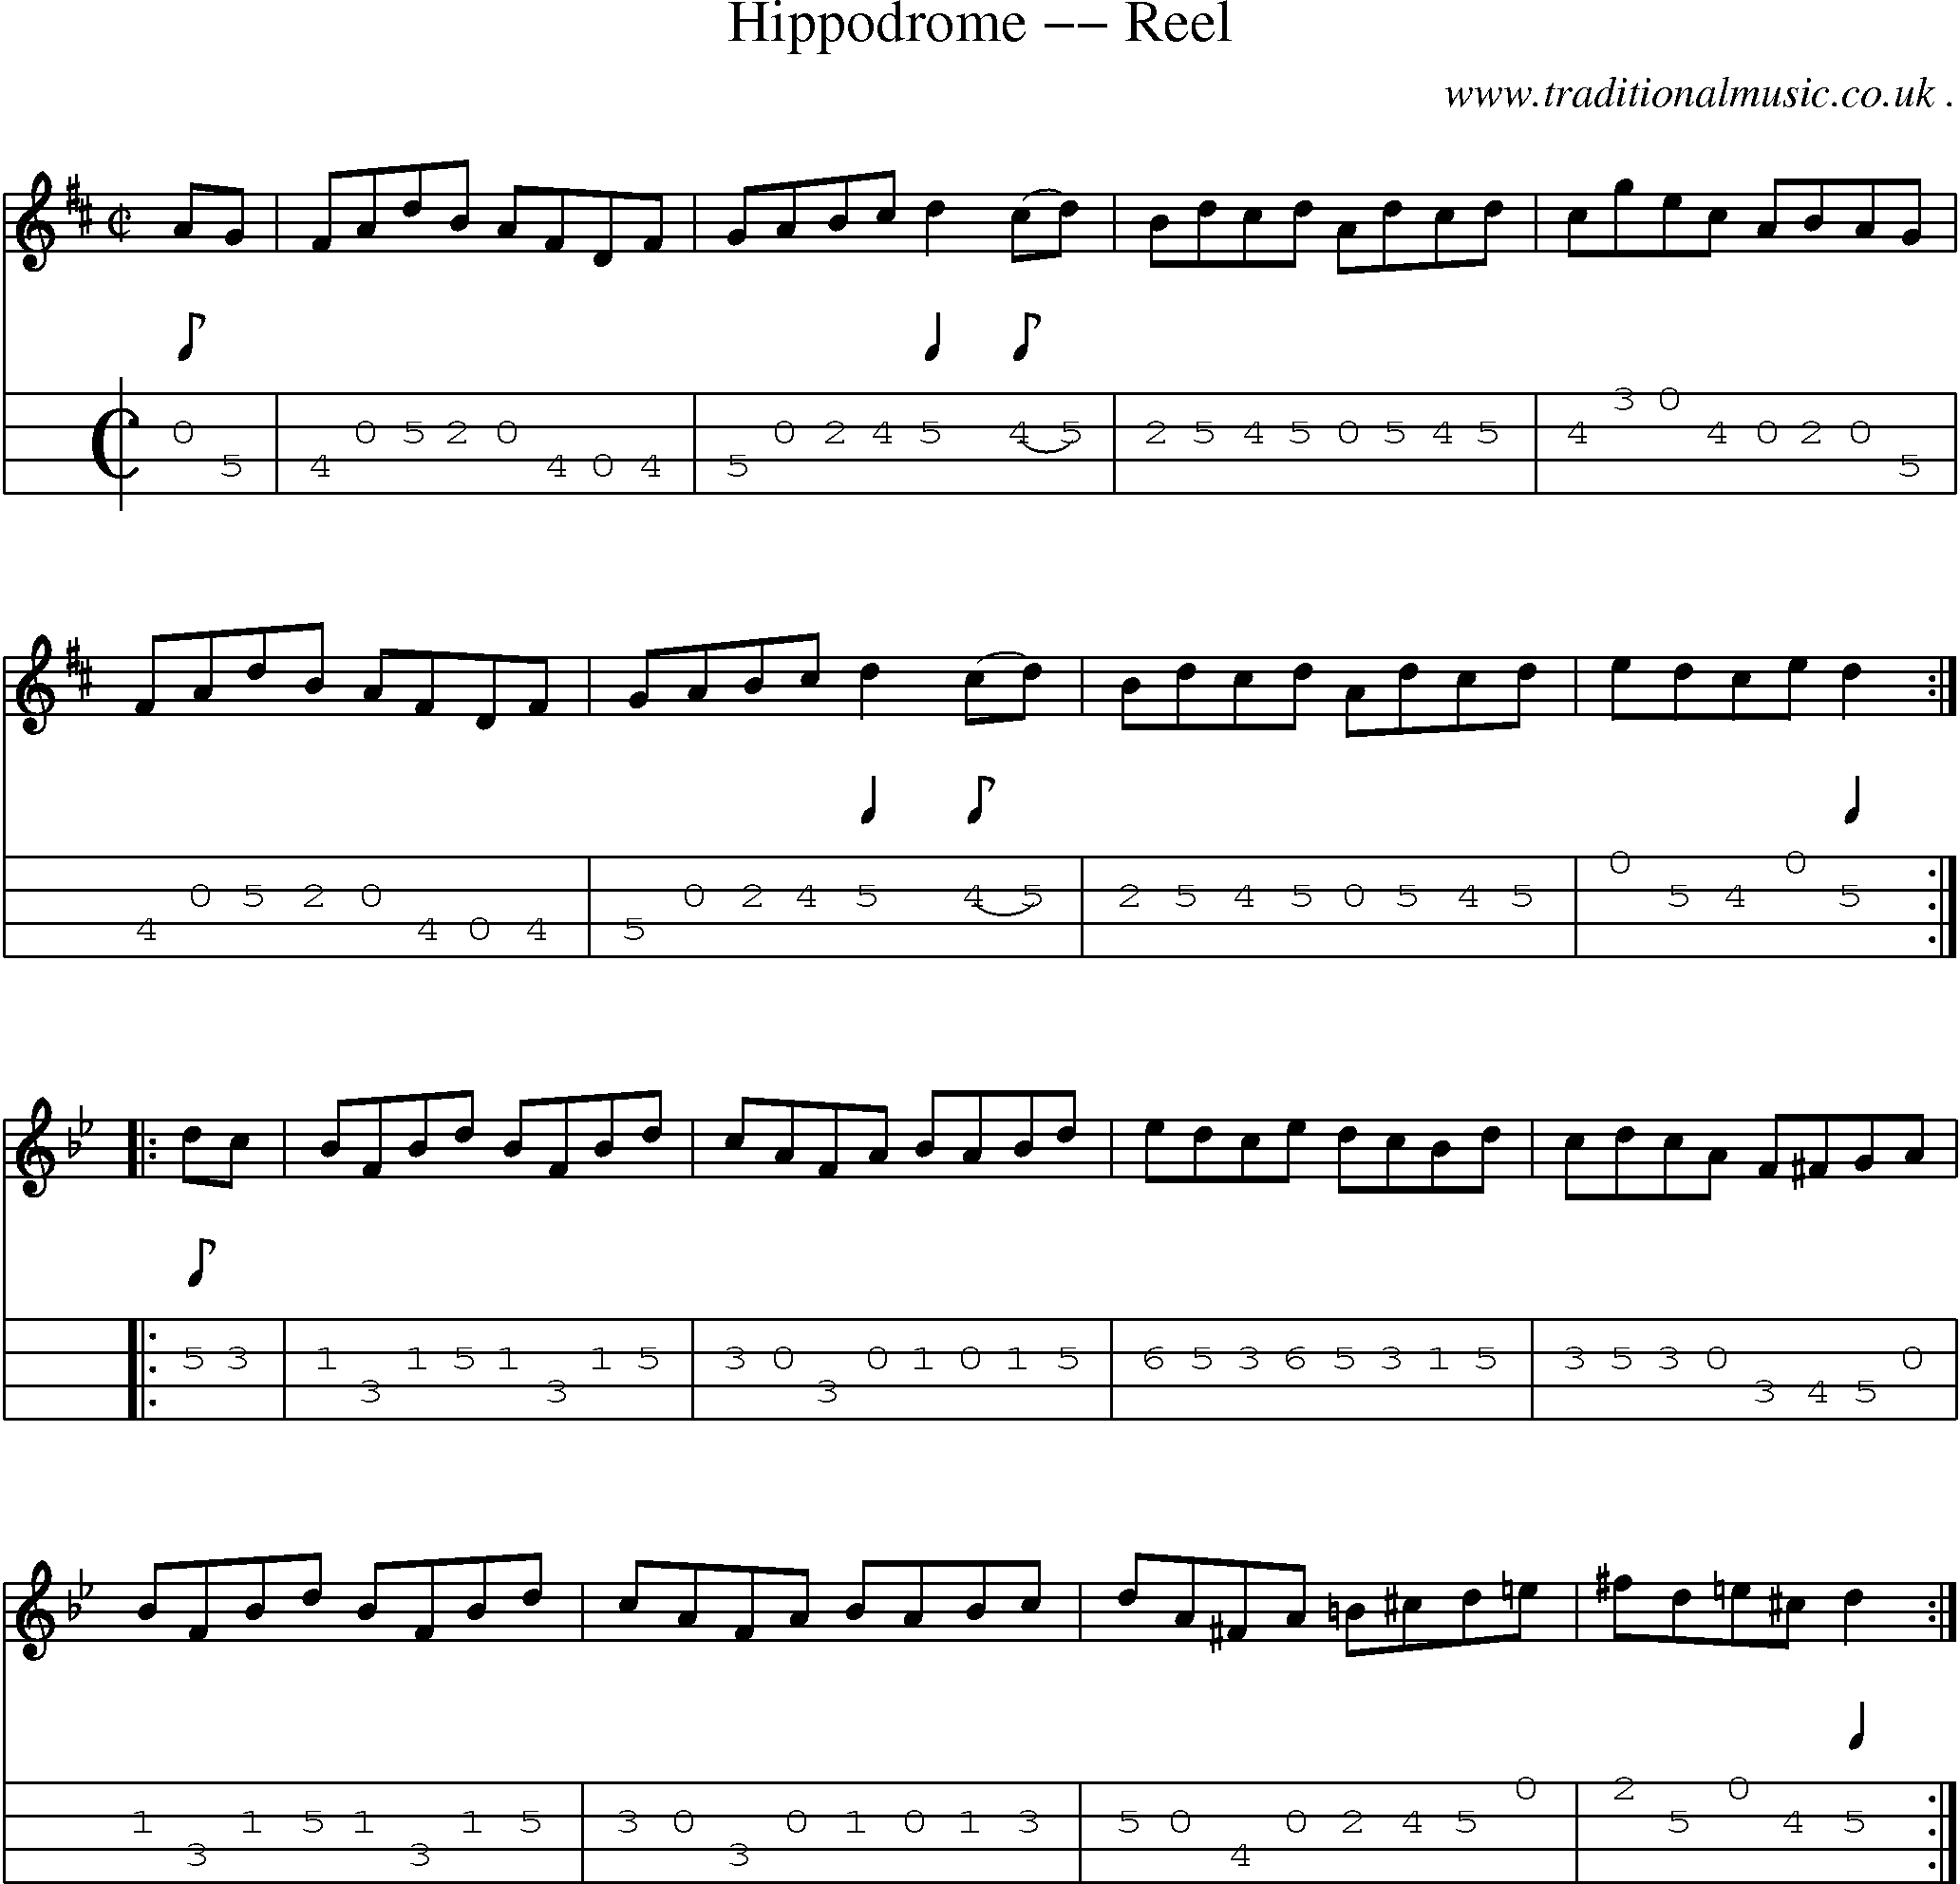 Music Score and Guitar Tabs for Hippodrome Reel